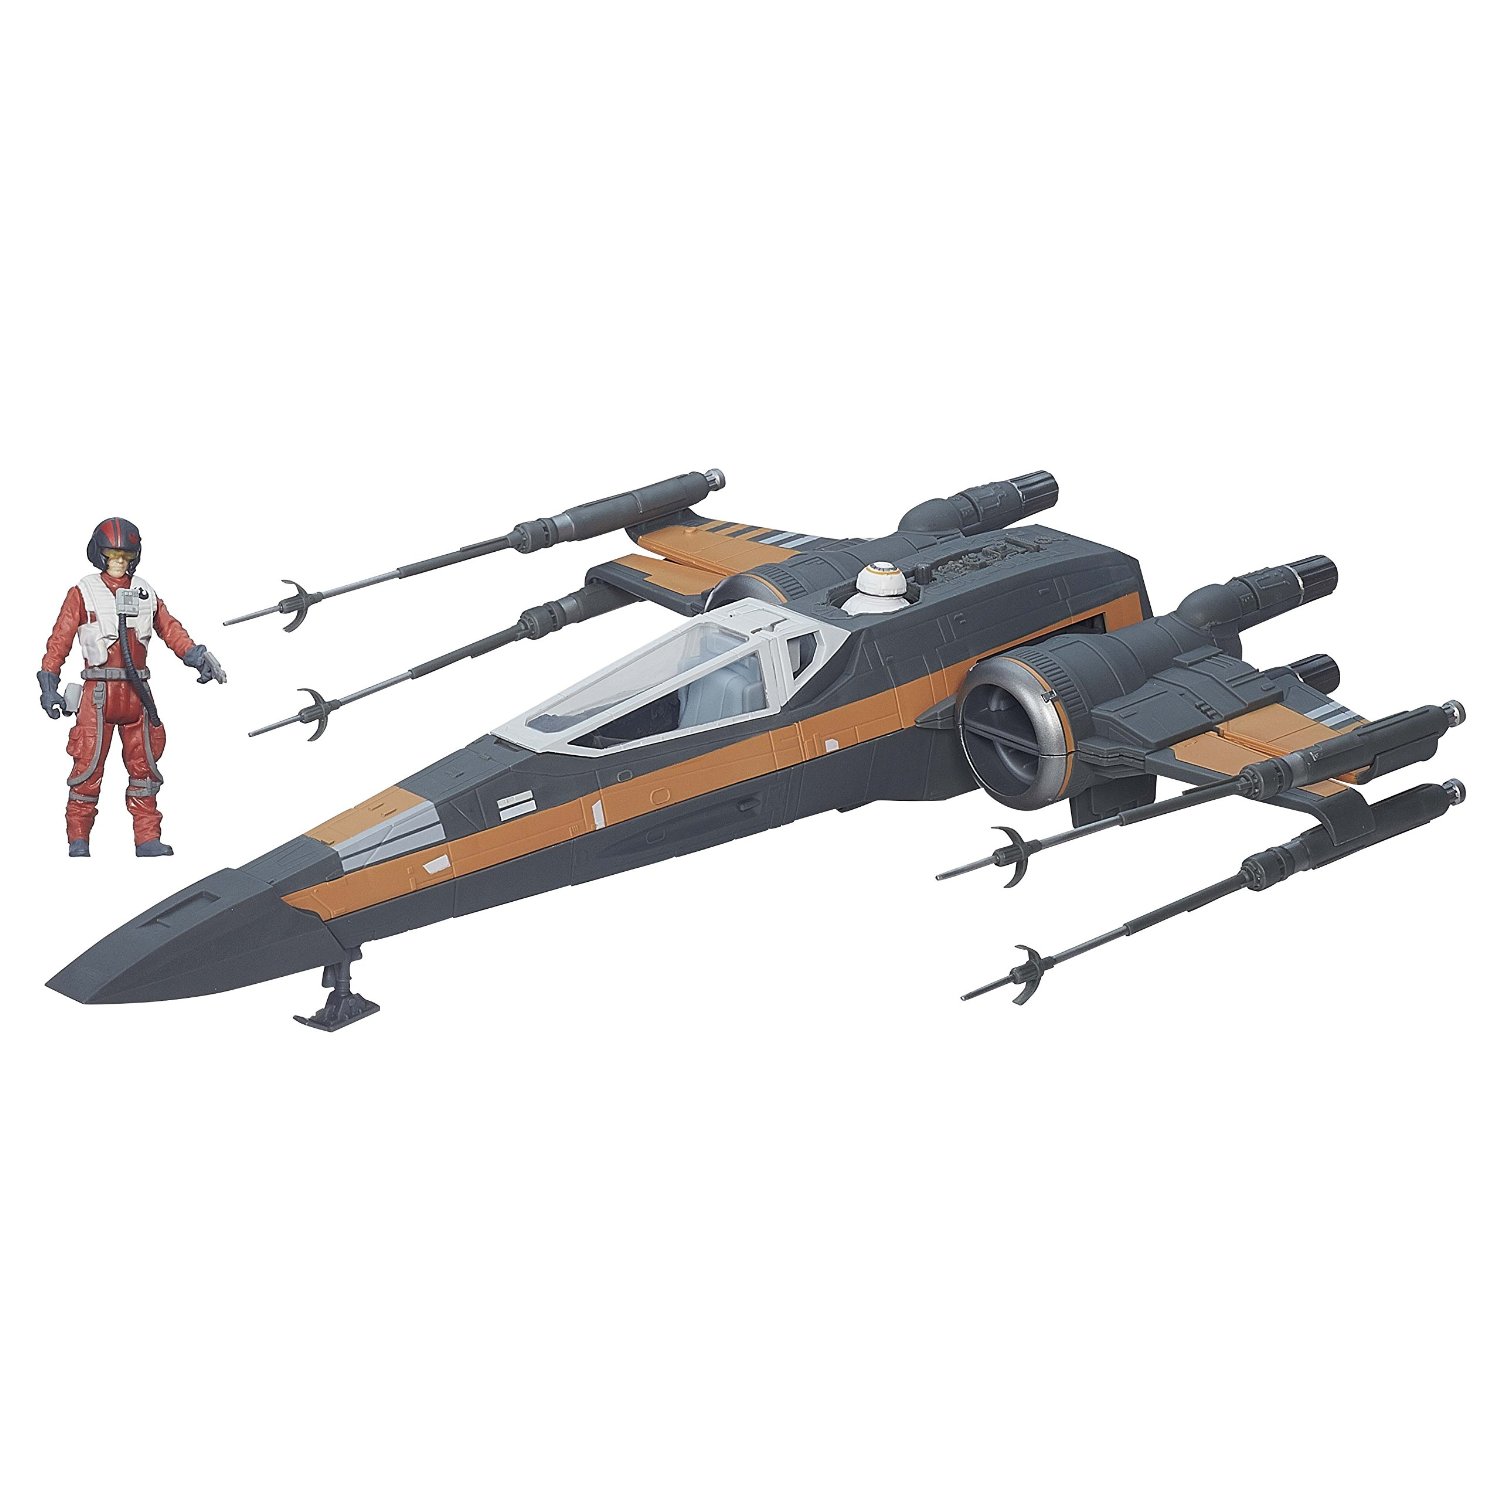 The Force Awakens X-Wing Toy